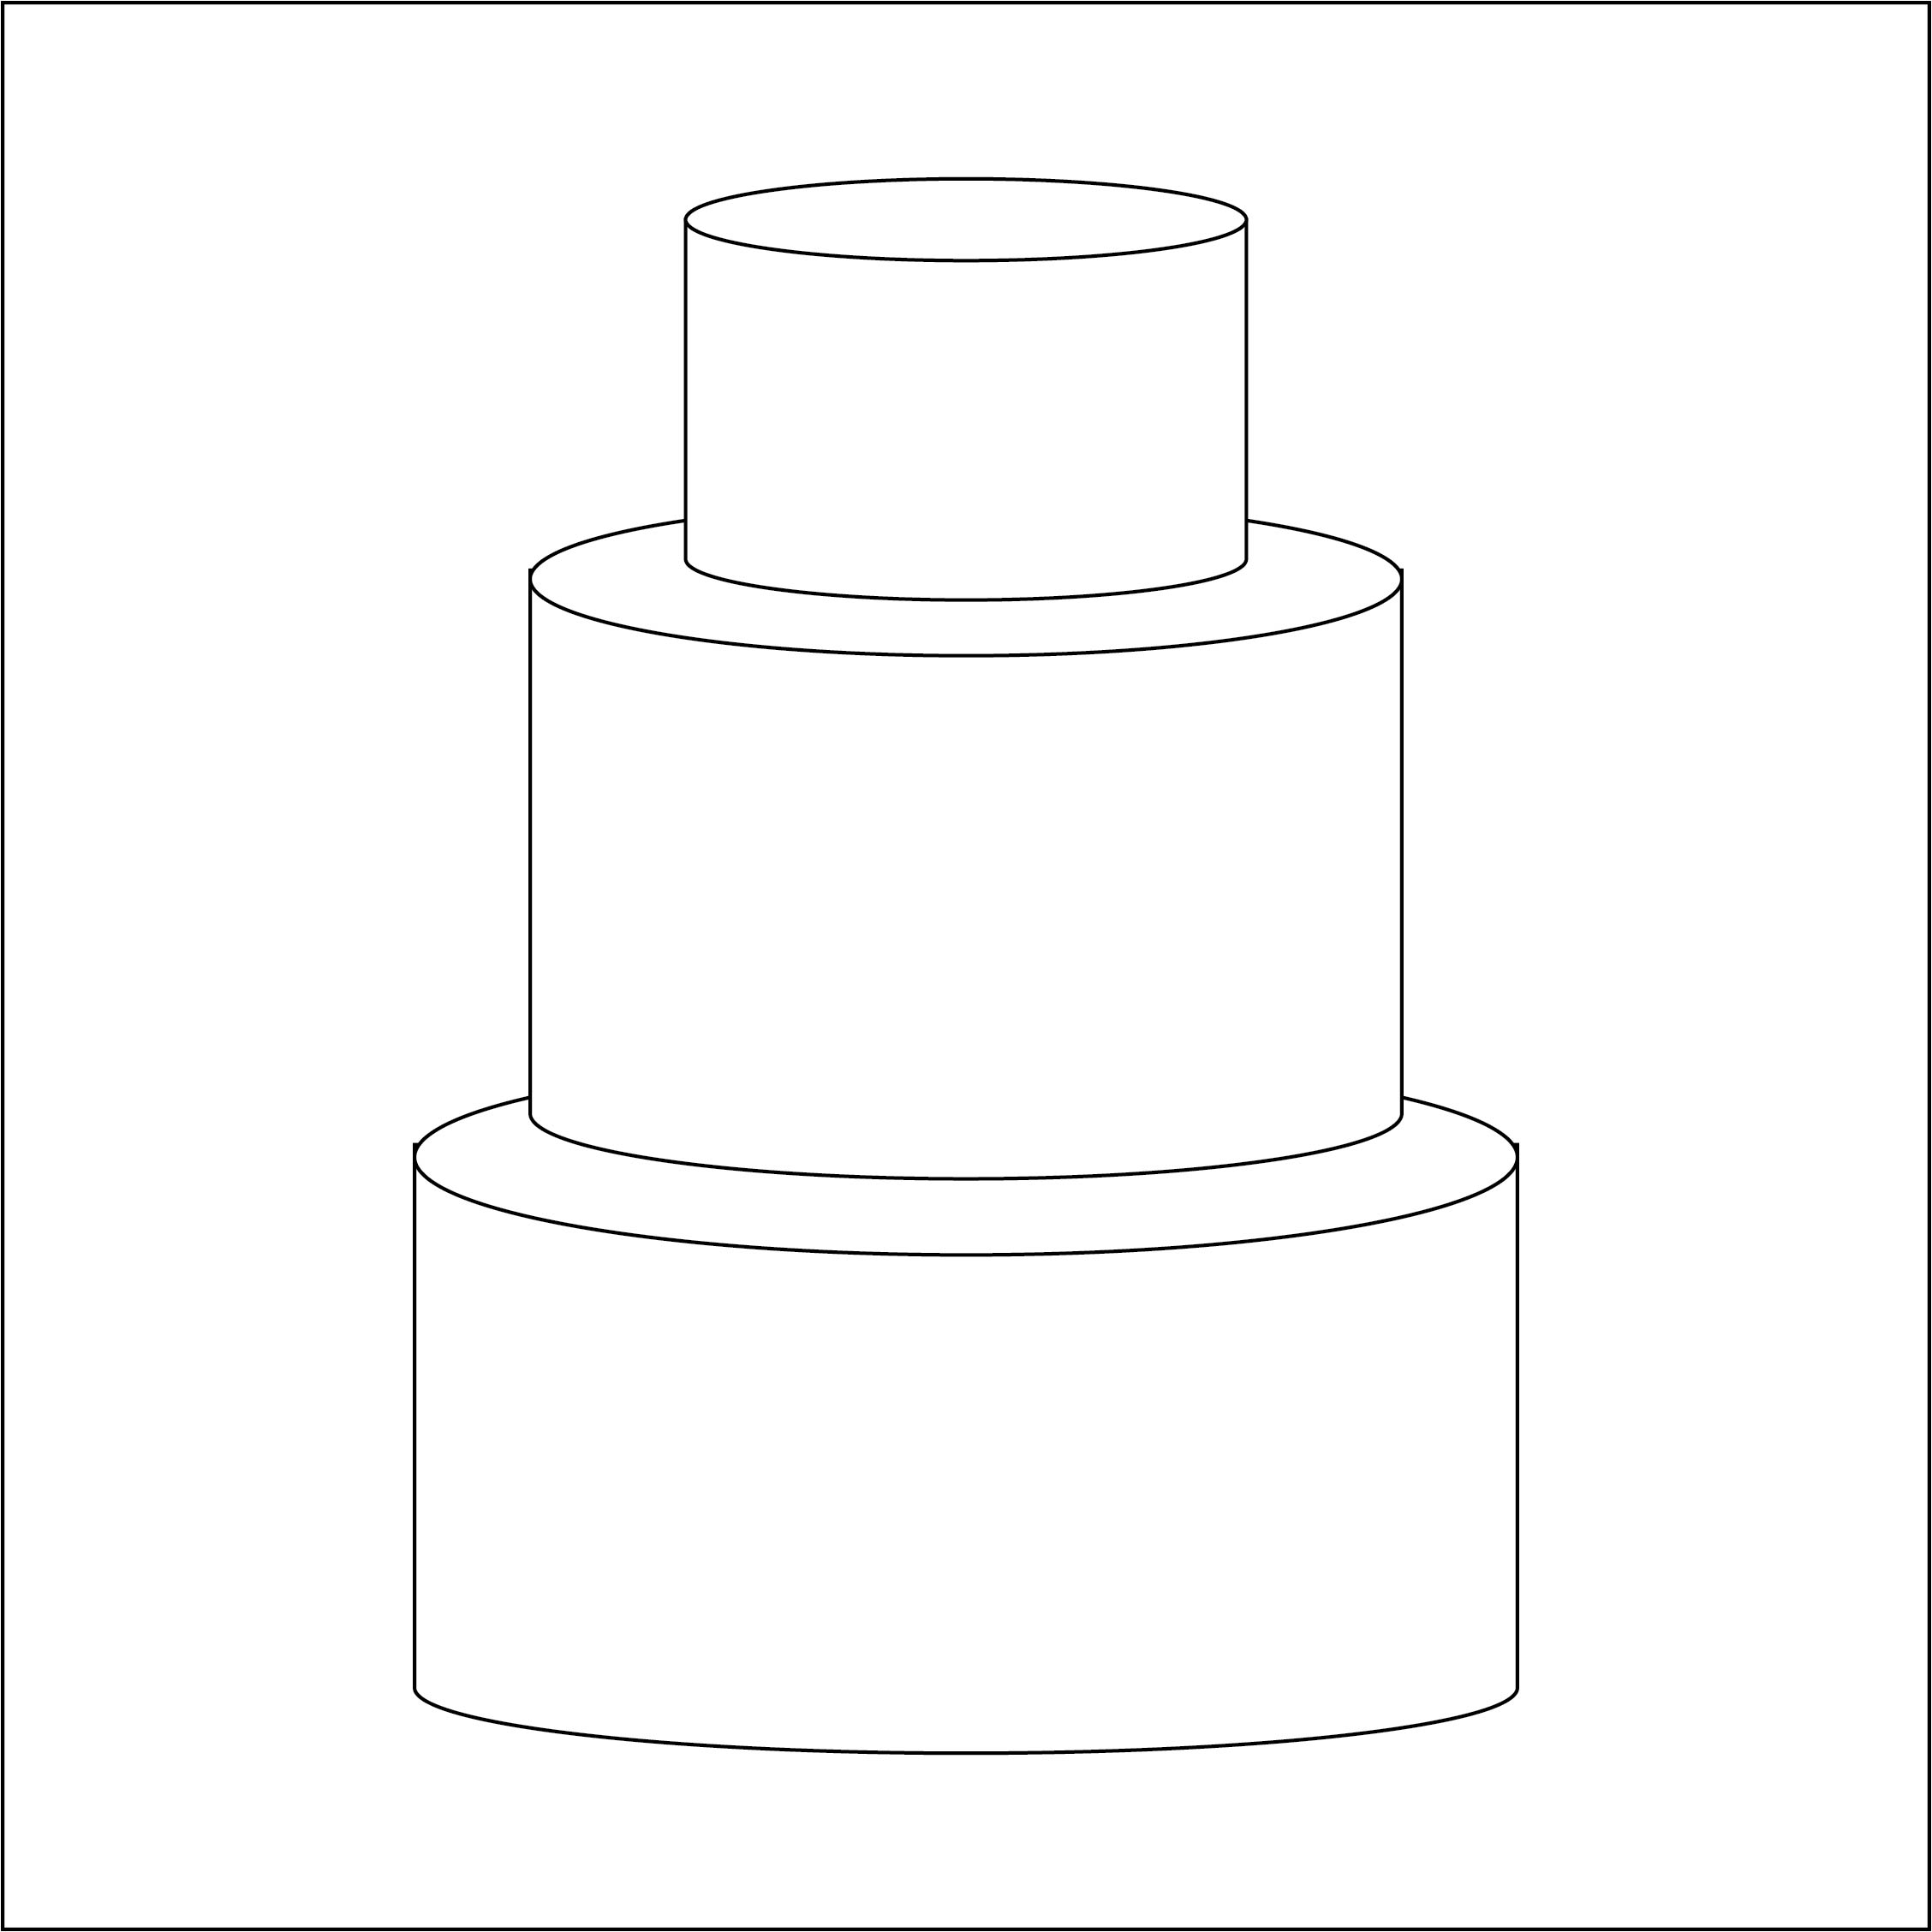 Cake Outline Colouring Pages - Free Colouring Pages